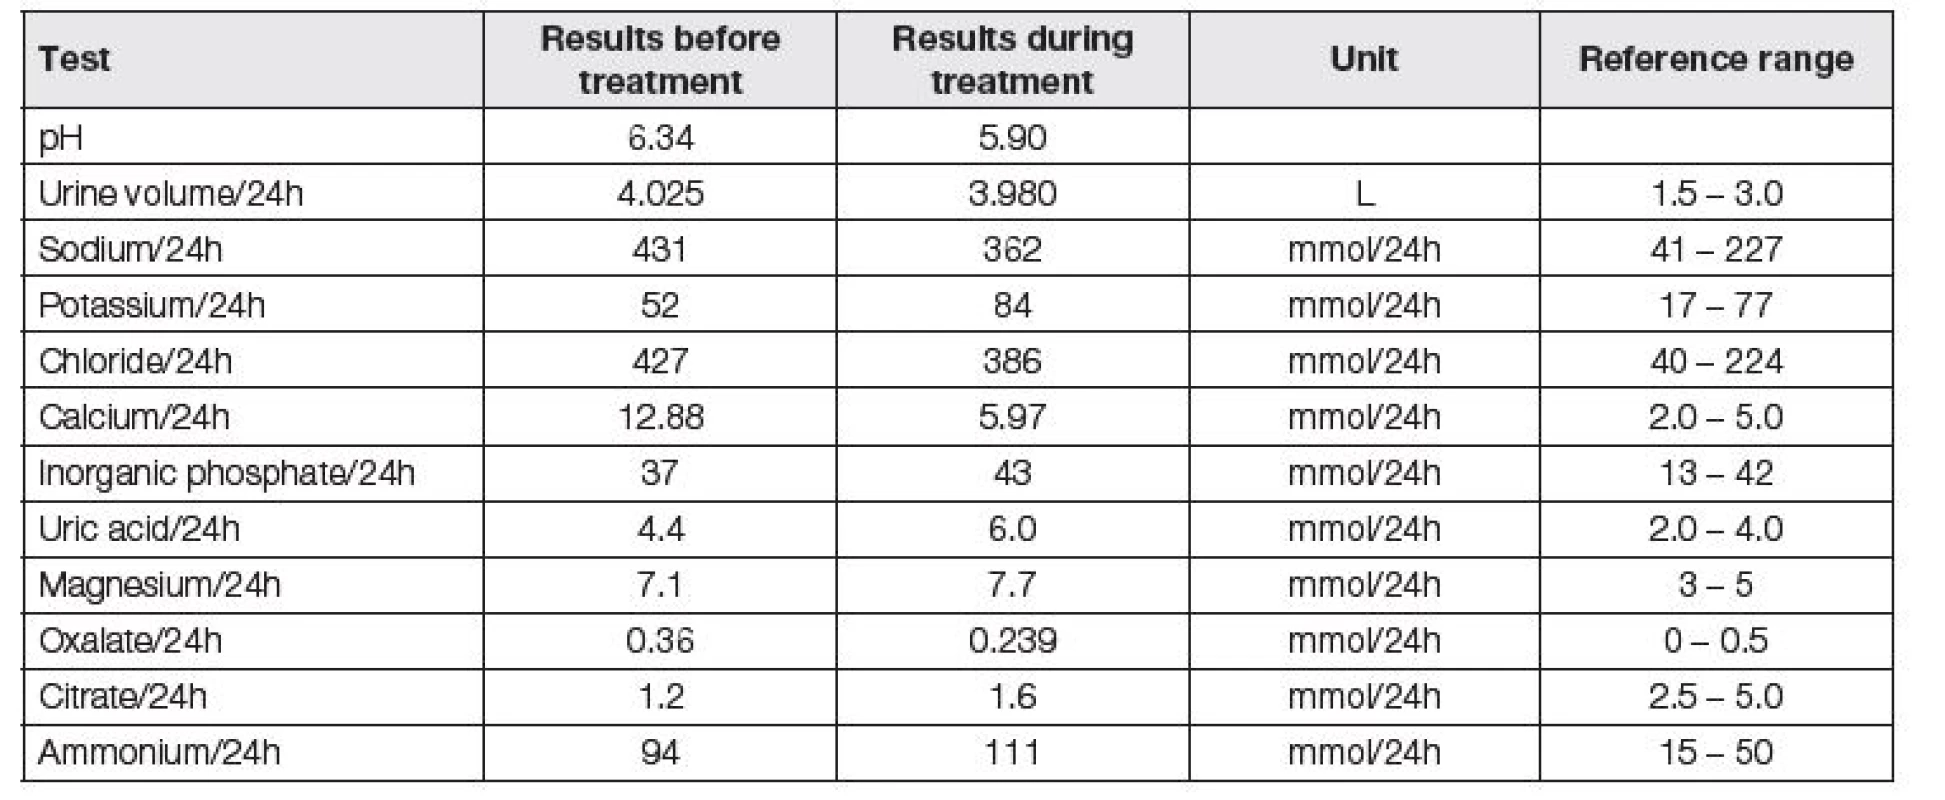 24 hour urine collection before and during treatment